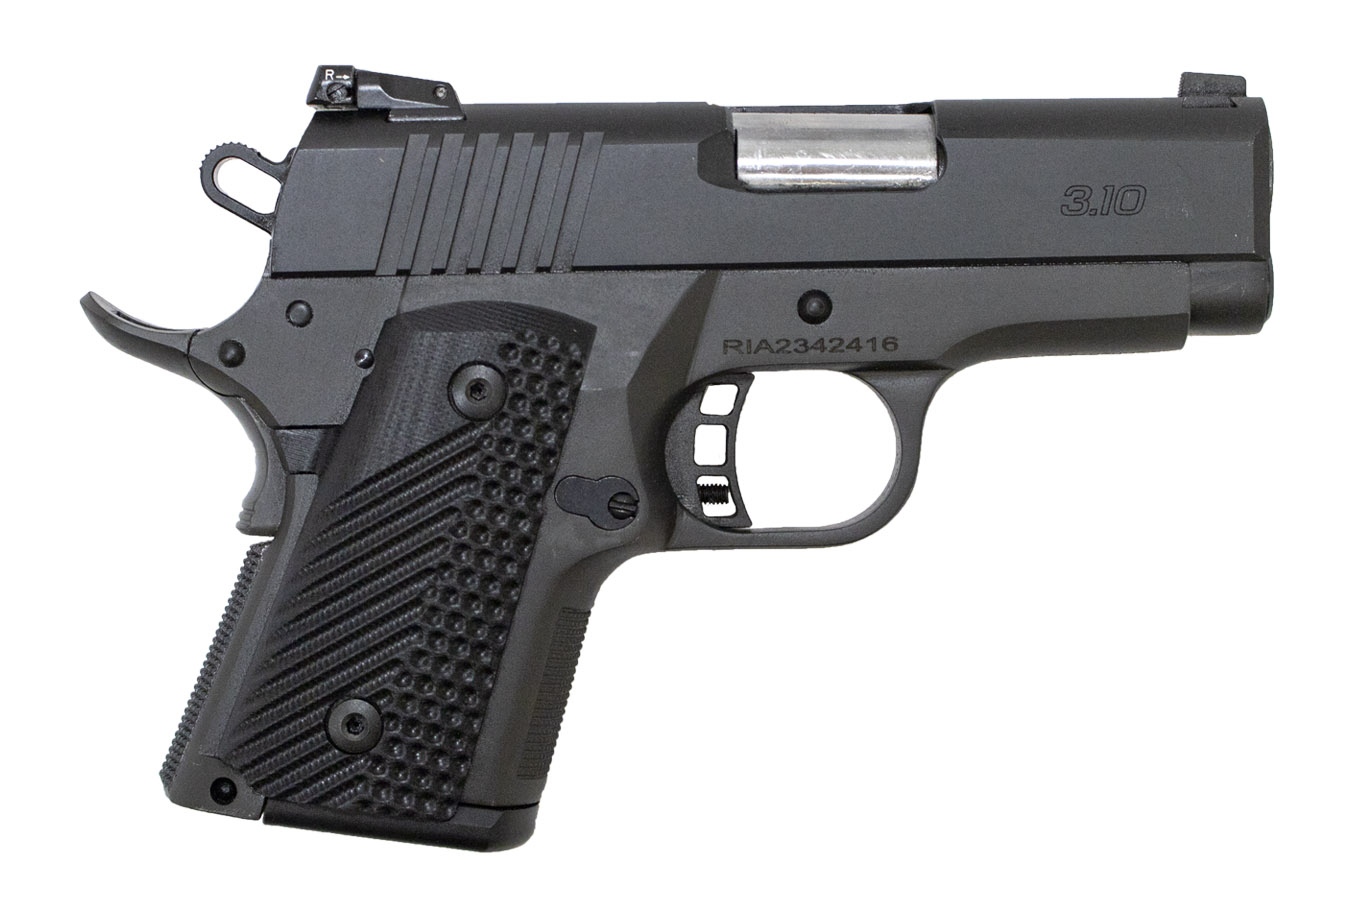 ARMSCOR BBR 3.10 45 ACP CARRY CONCEAL PISTOL